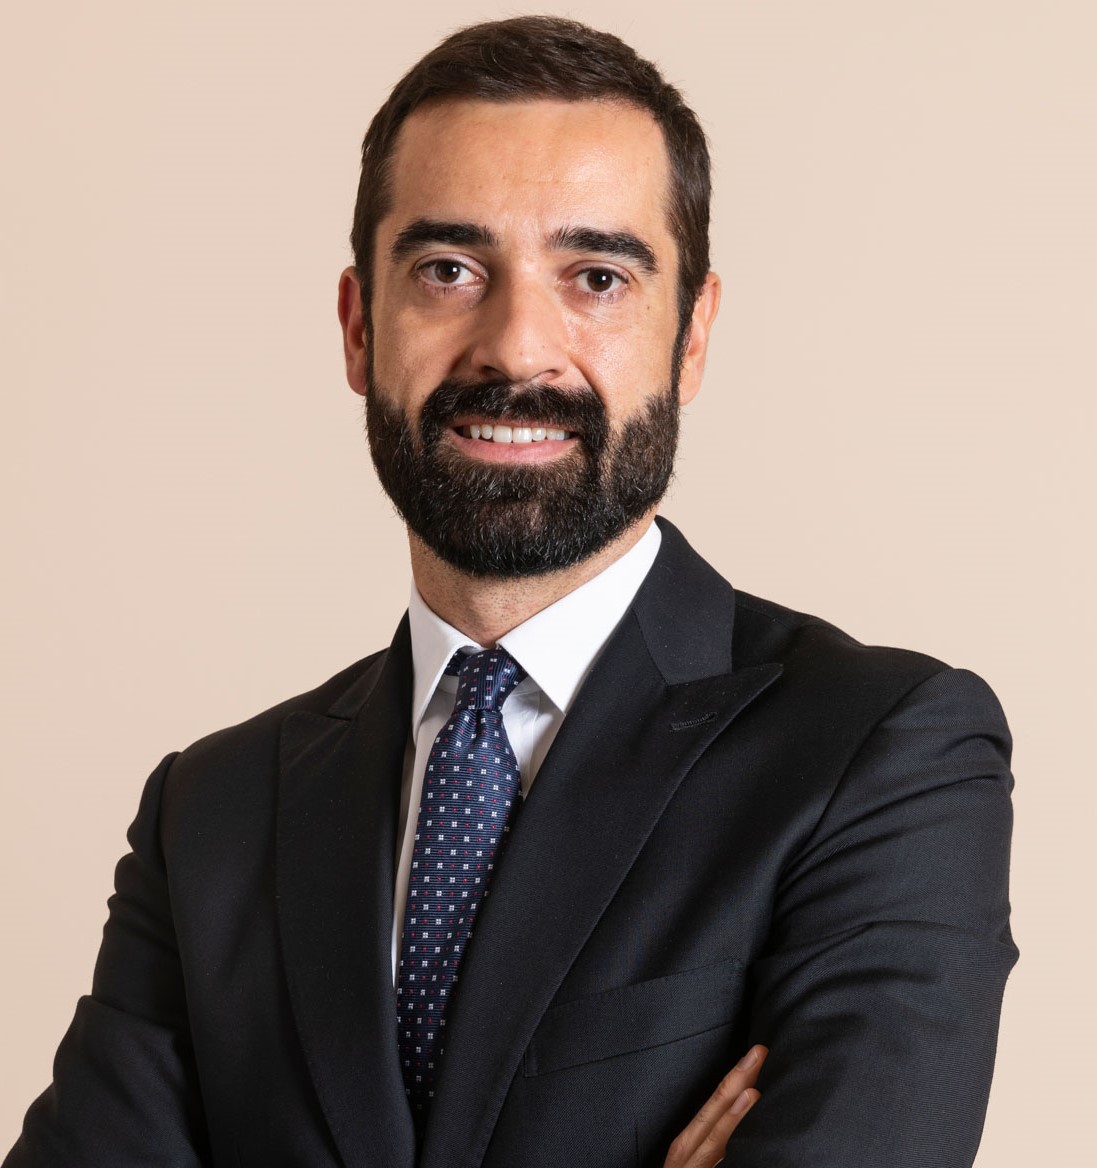 <span style='line-height: 0.6'>Paolo Rizzo</span><br />
<span style='color:#00b5e2;font-size:25px;line-height: 0.6 !important;'><br />
Head of Compliance & AML</span>